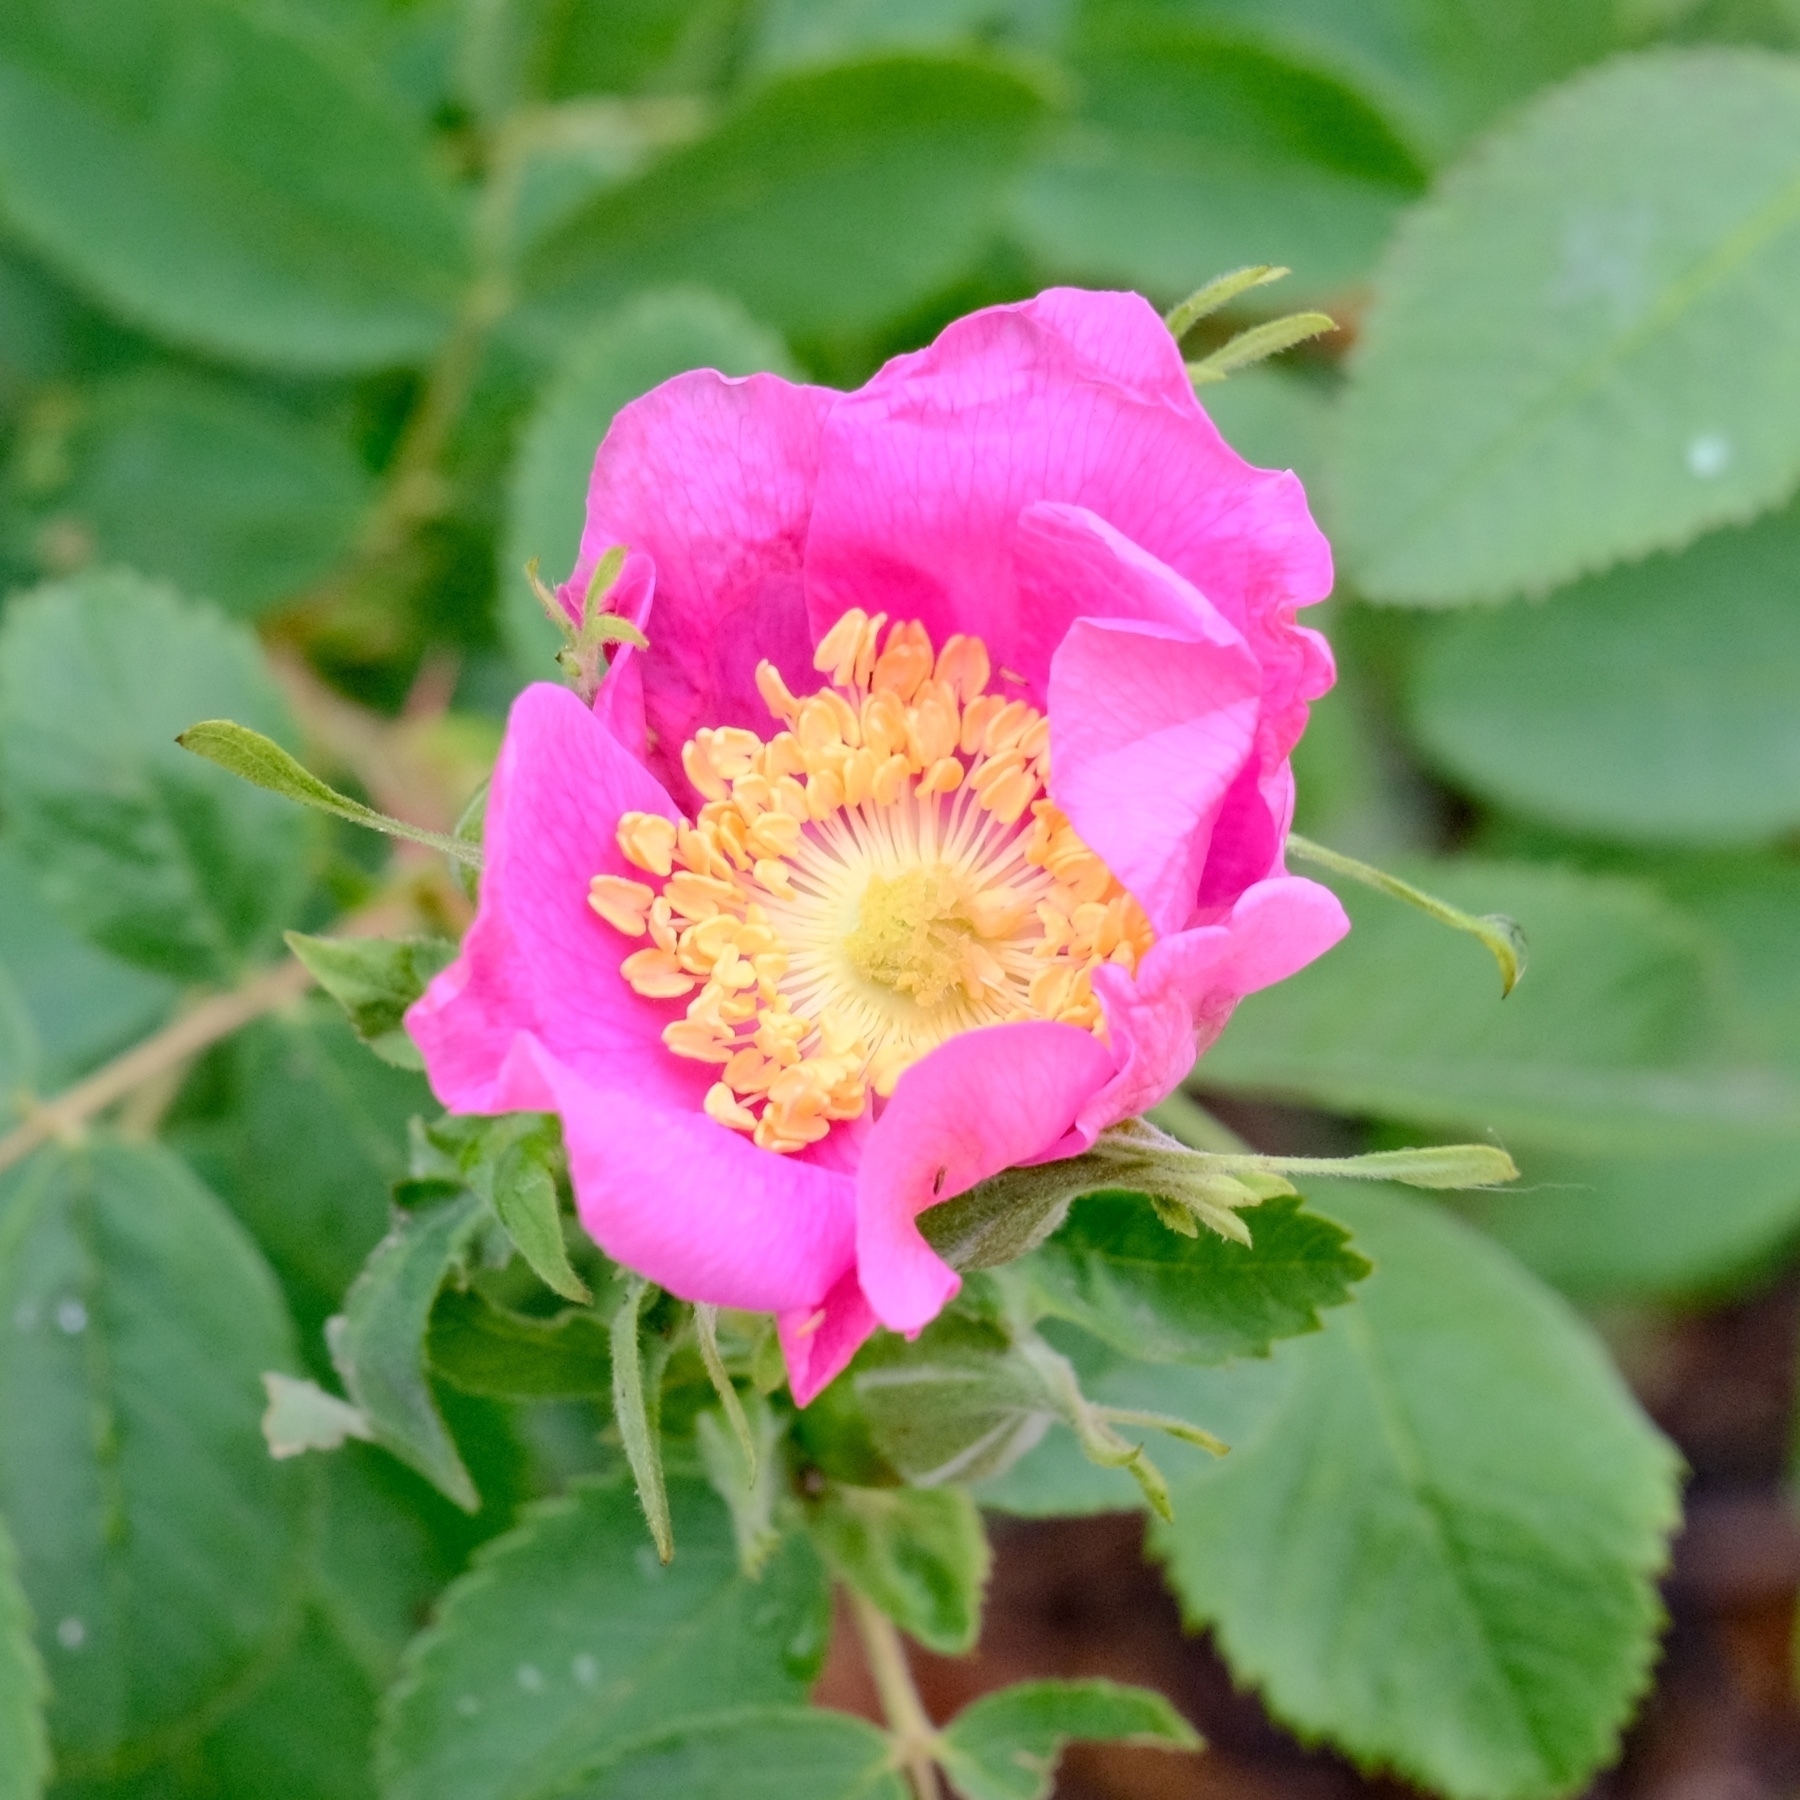 magenta rose with yellow center and luscious foliage behind